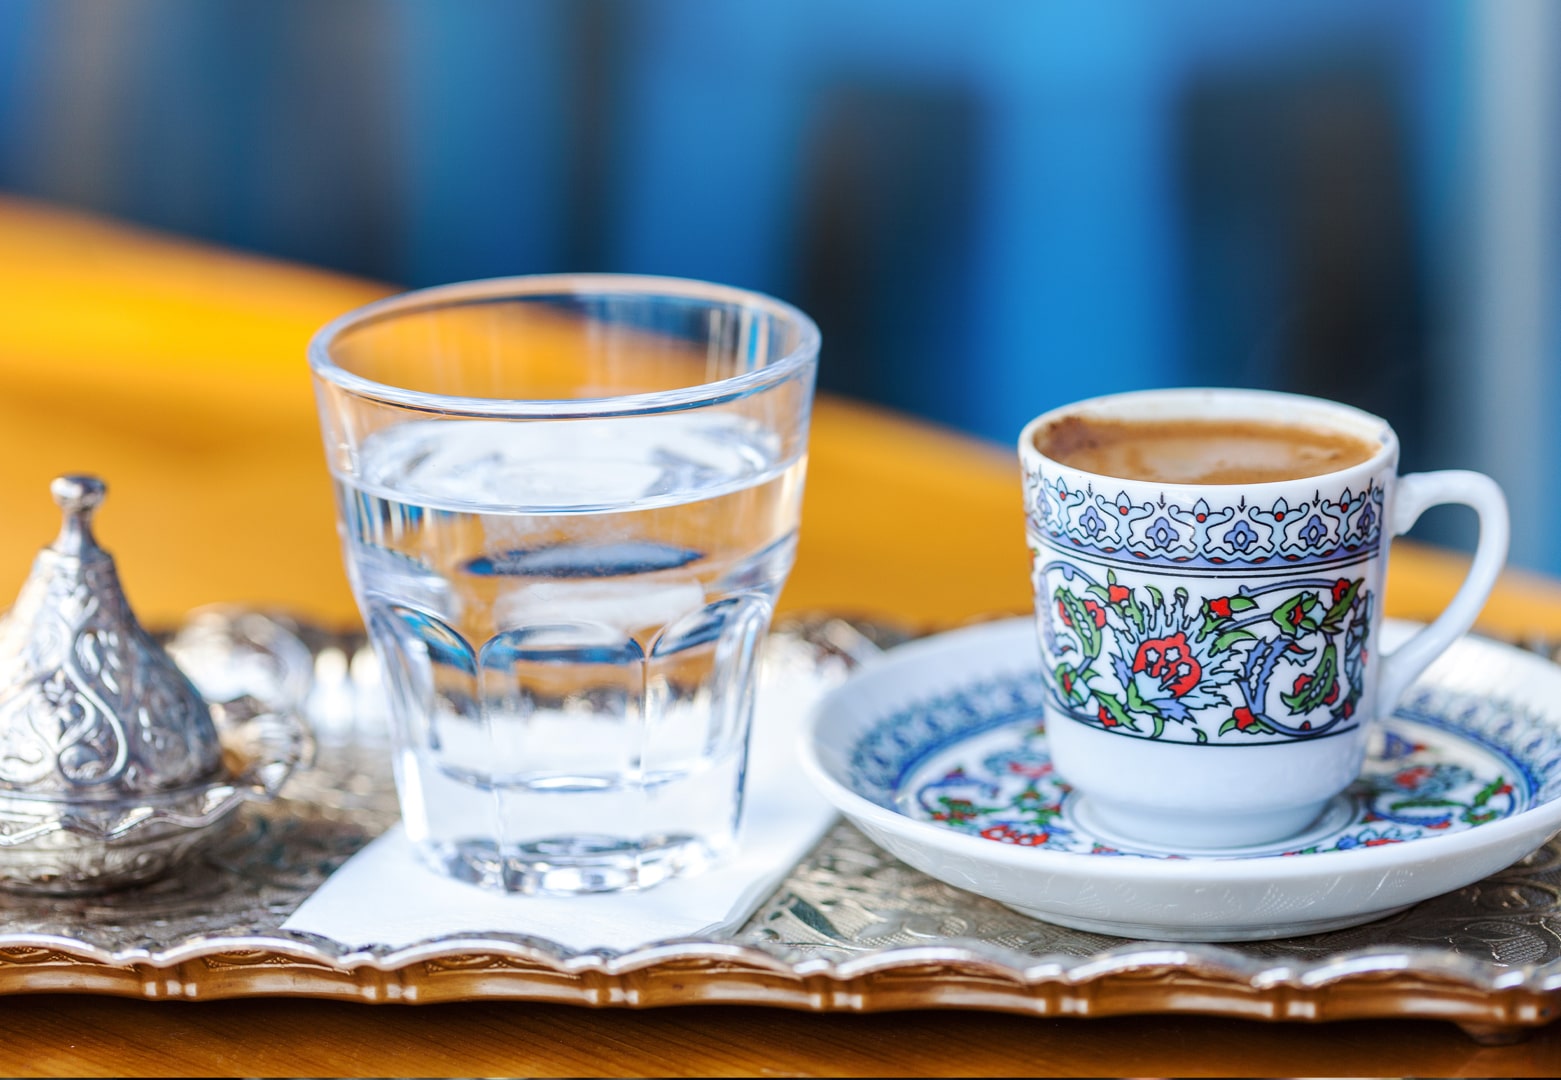 Enjoy Macun with a Cup of Turkish Coffee